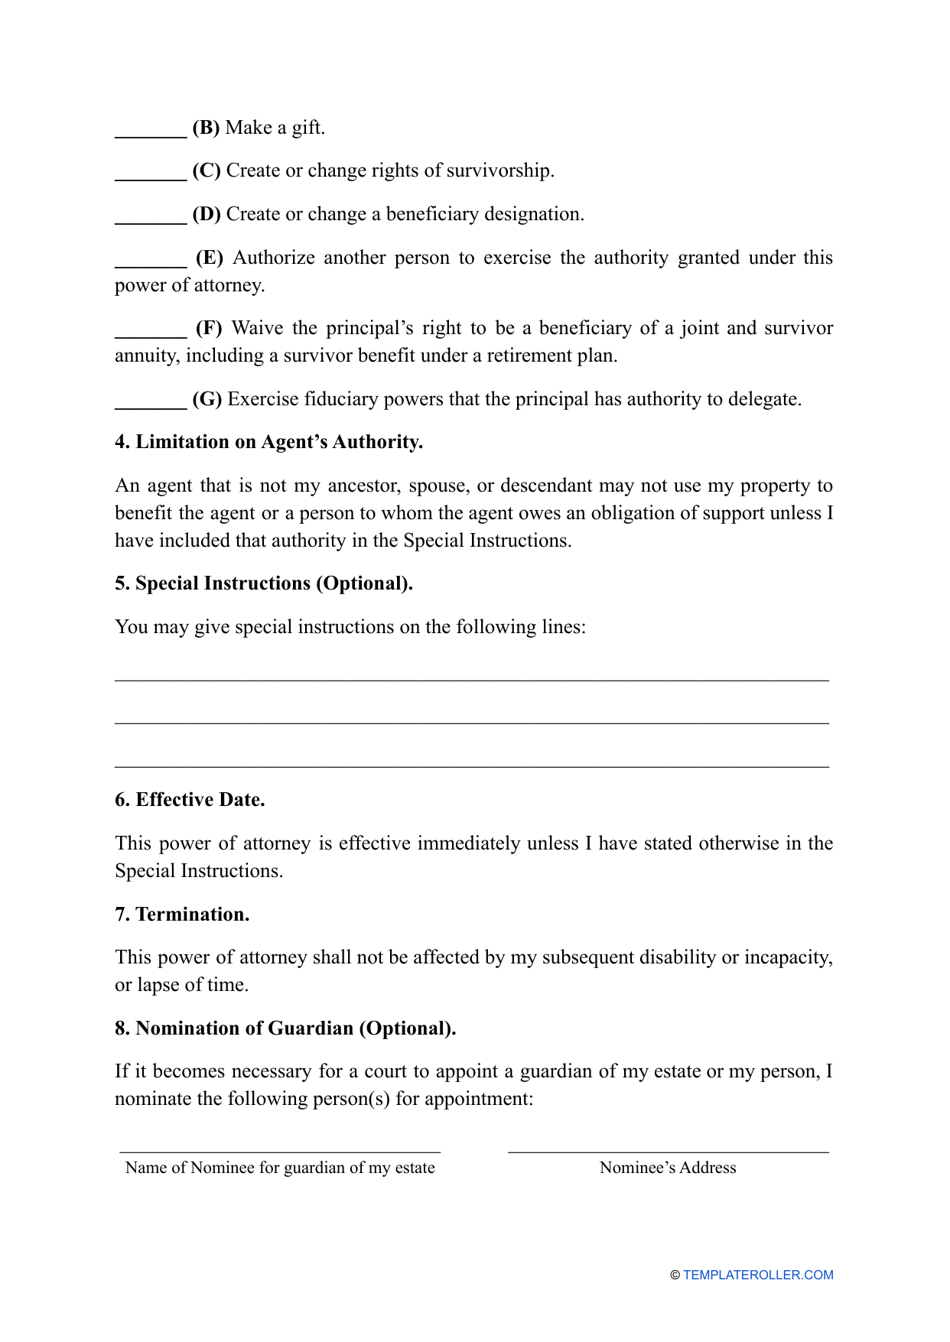 Montana Durable Power Of Attorney Form Fill Out Sign Online And Download Pdf Templateroller 0248